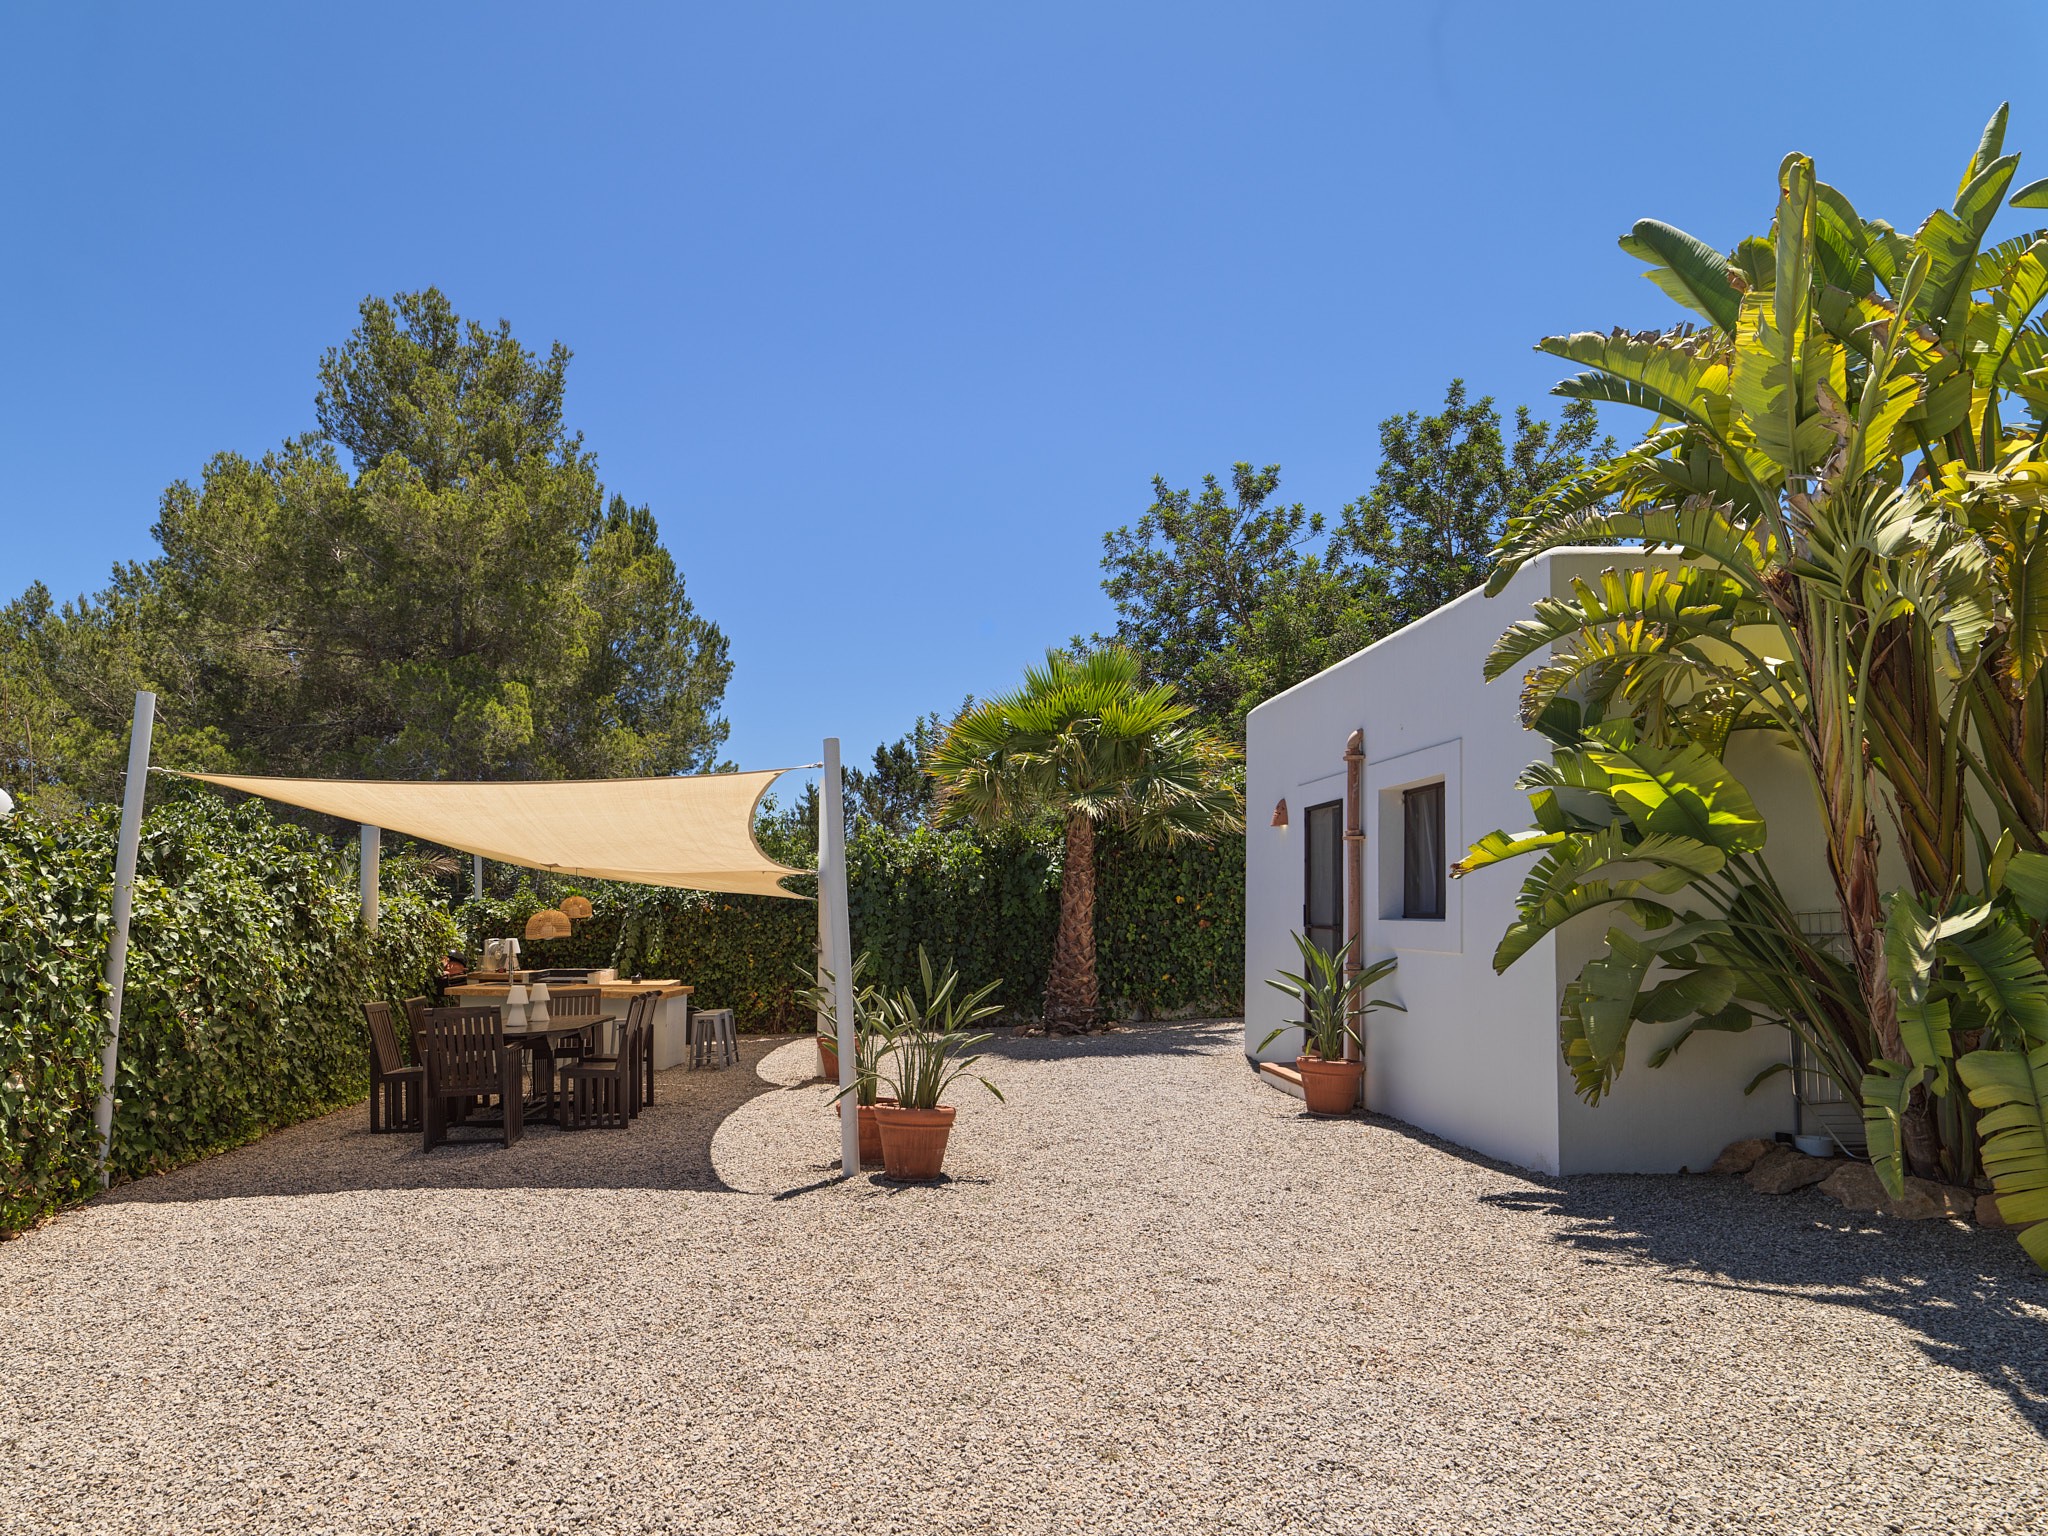 Perfectly maintained finca-style villa in central location - 12